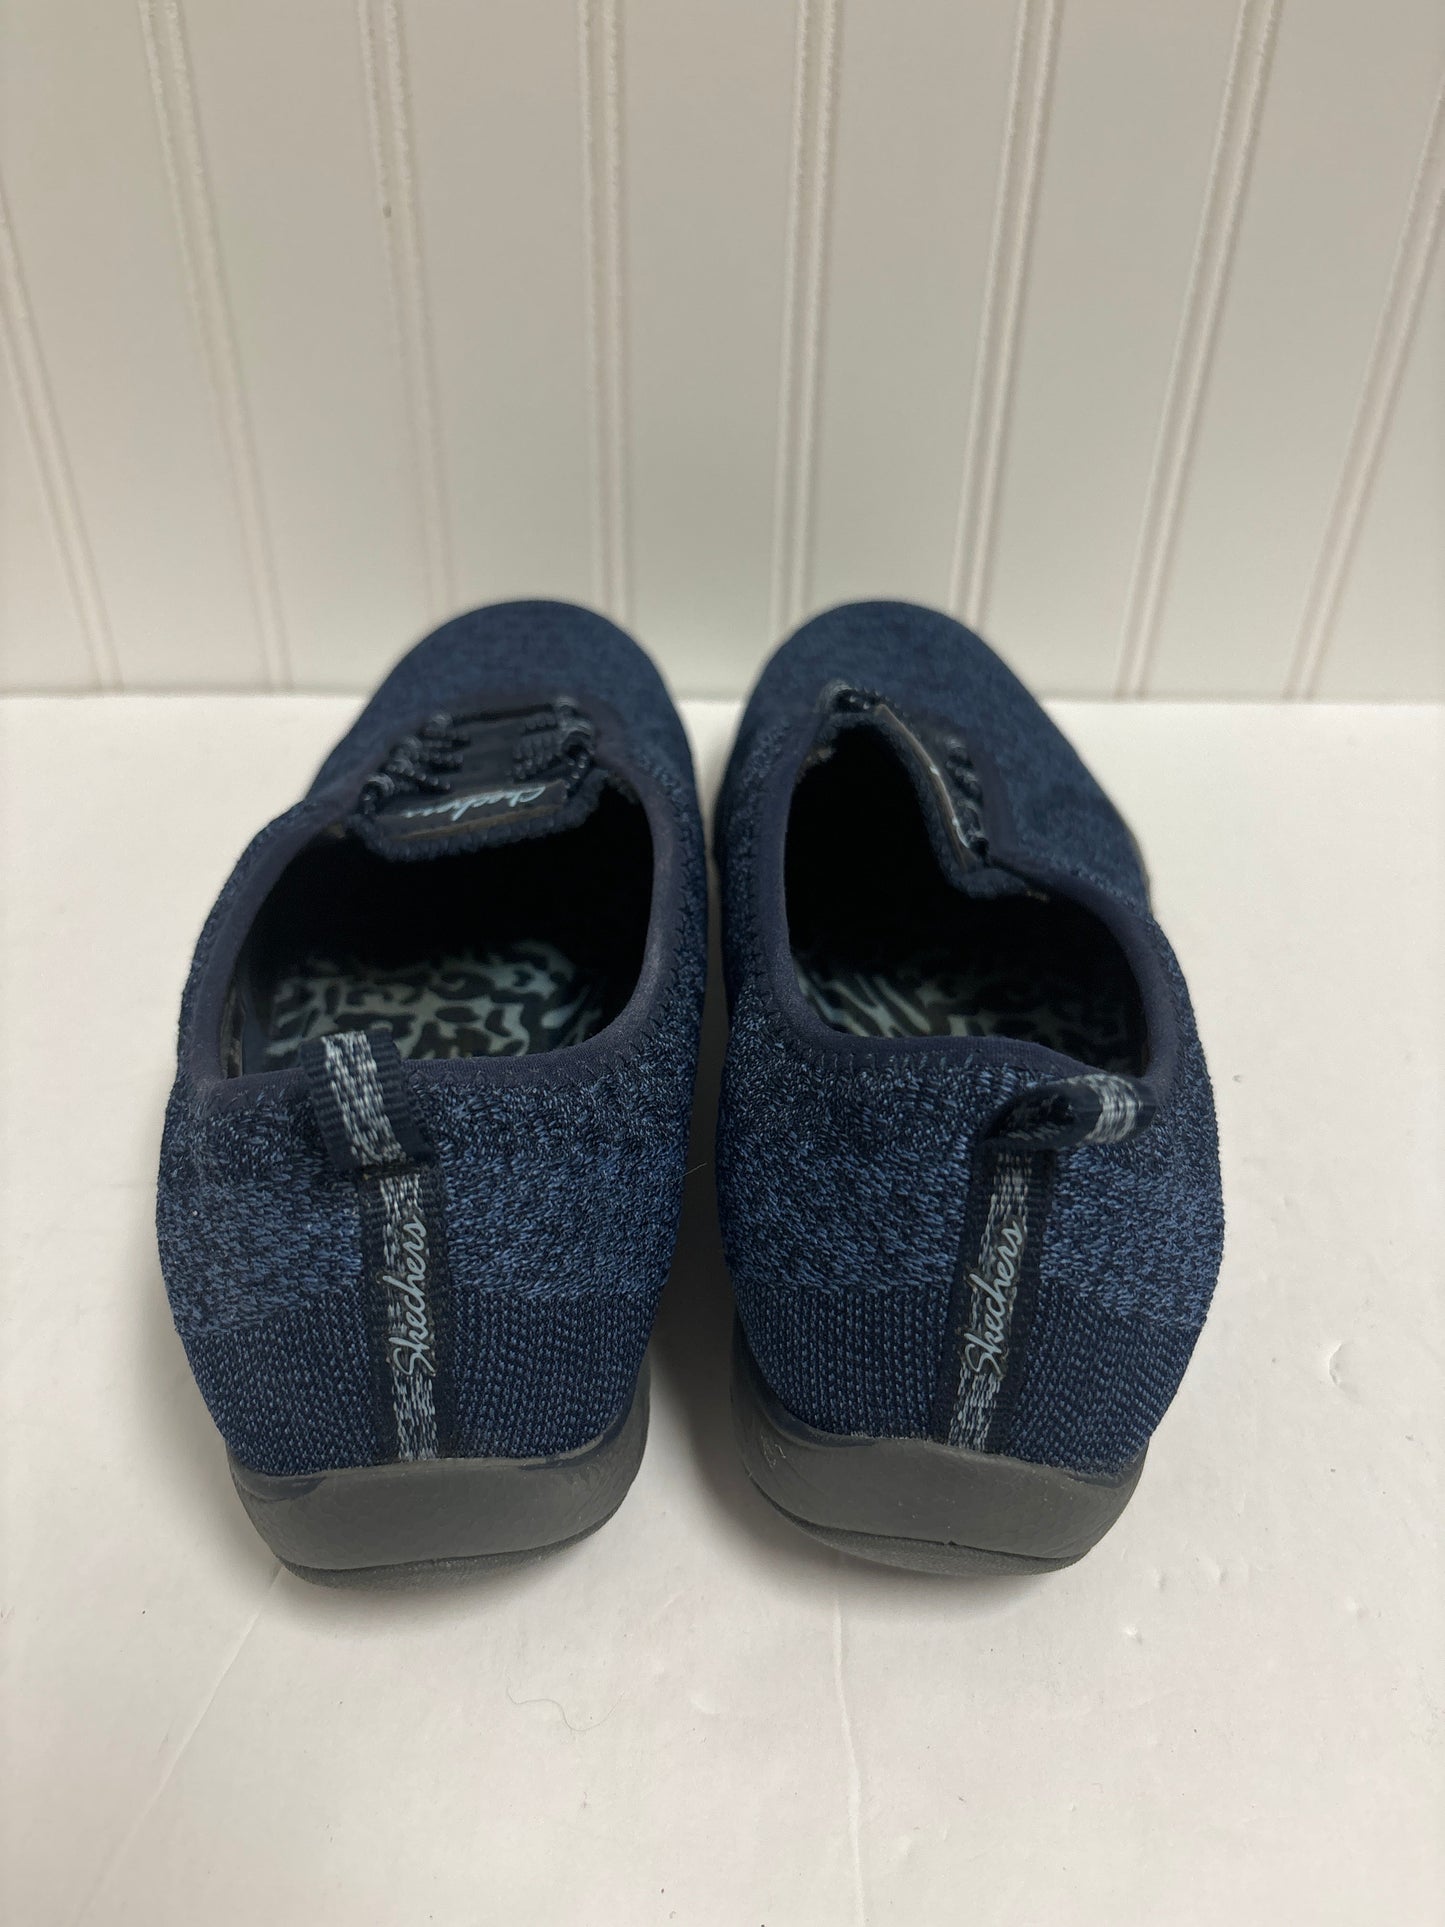 Navy Shoes Sneakers Skechers, Size 8.5